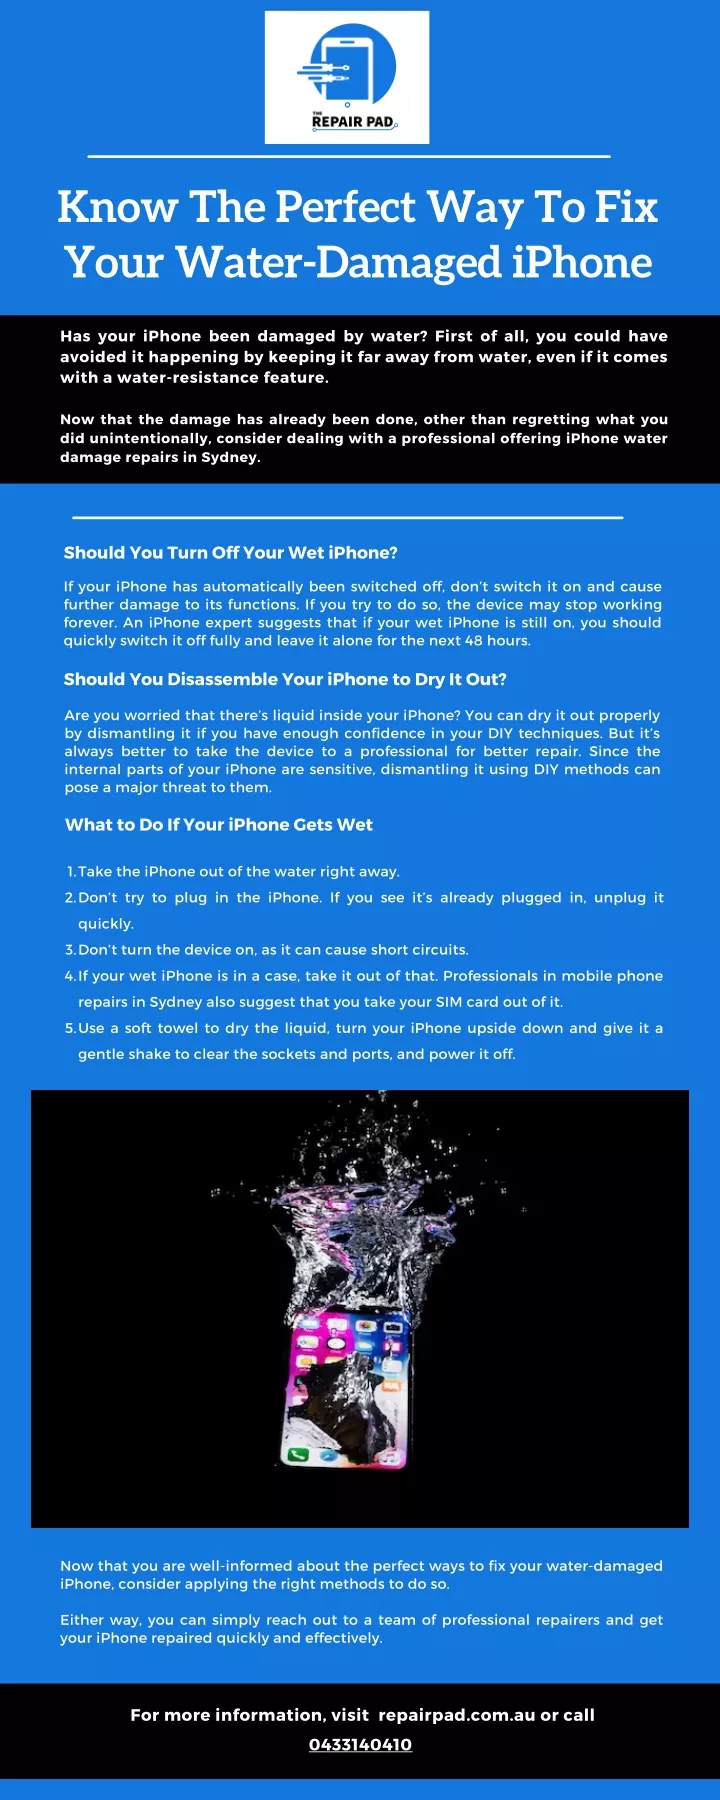 PPT - Know The Perfect Way To Fix Your Water-Damaged iPhone PowerPoint Presentation - ID:12212615